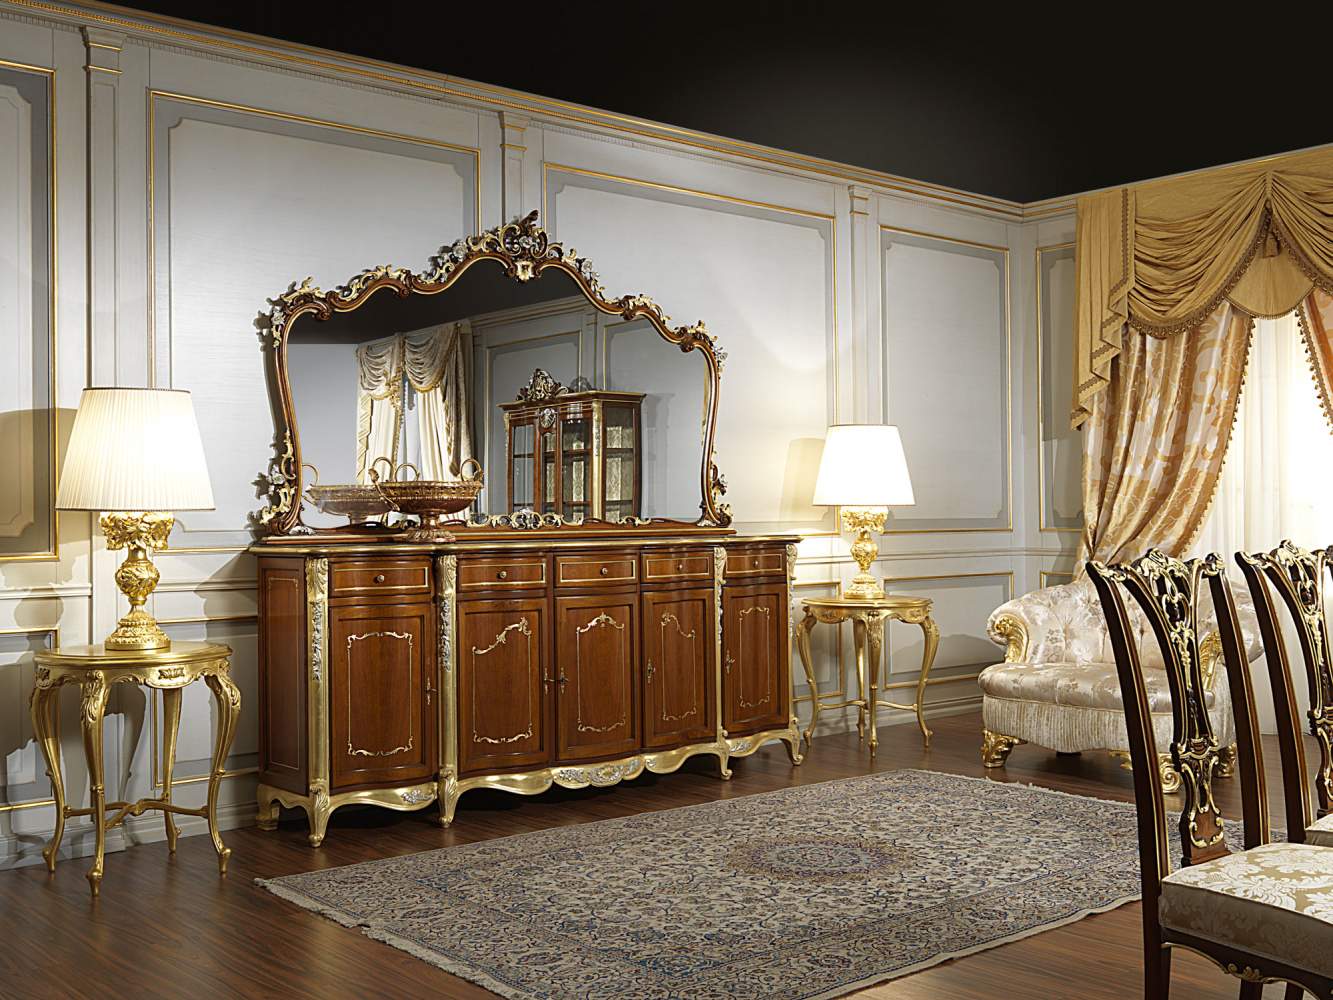 The classic cupboard dining room in Louis XV style